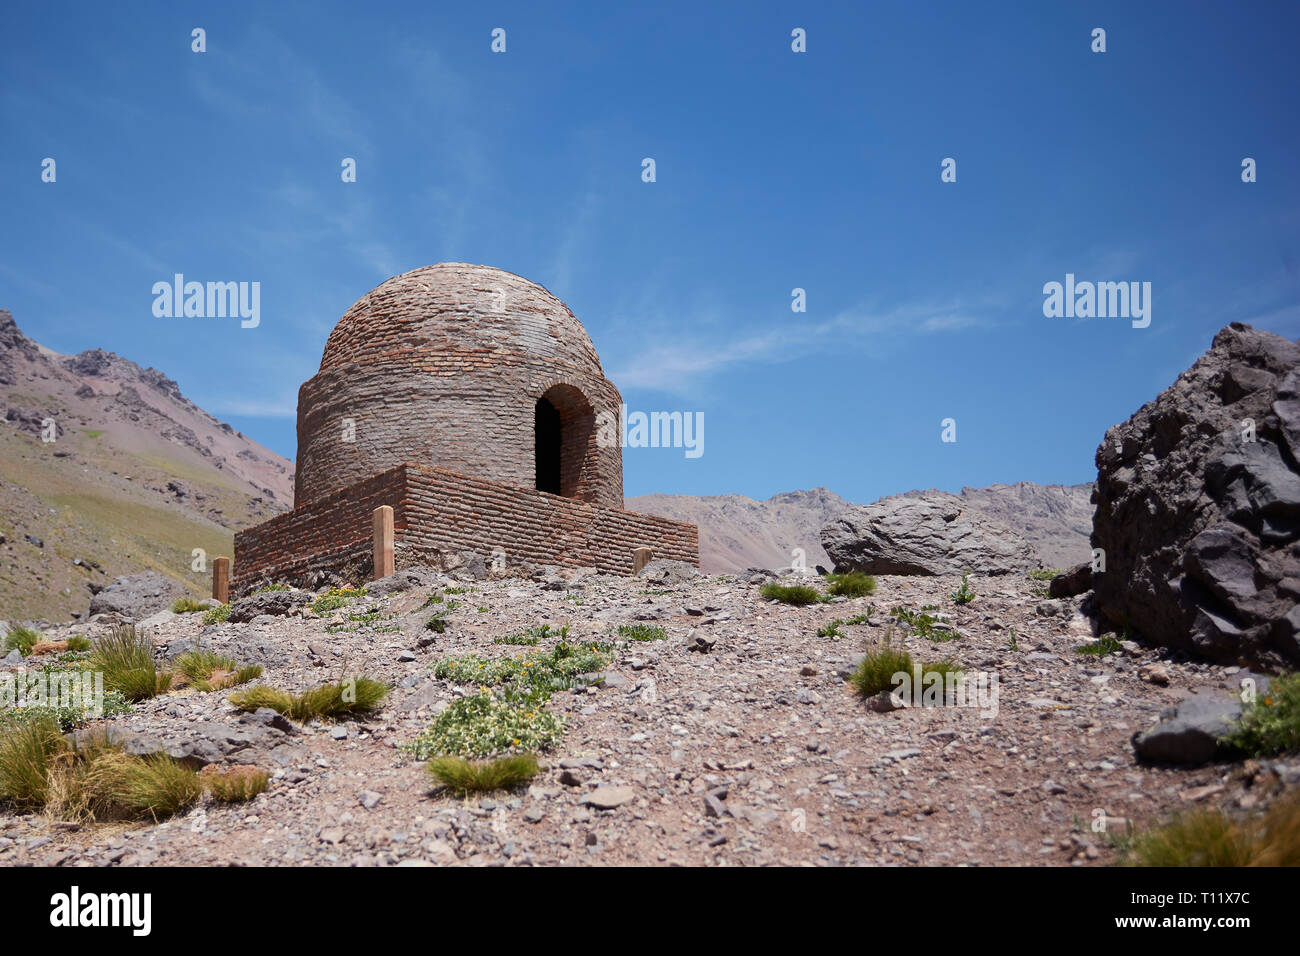 MENDOZA, ARGENTINE, January 25, 2017. Casuchas del Rey, They were built in the 17th century in the Andes mountain range, between Chile and Mendoza. Stock Photo